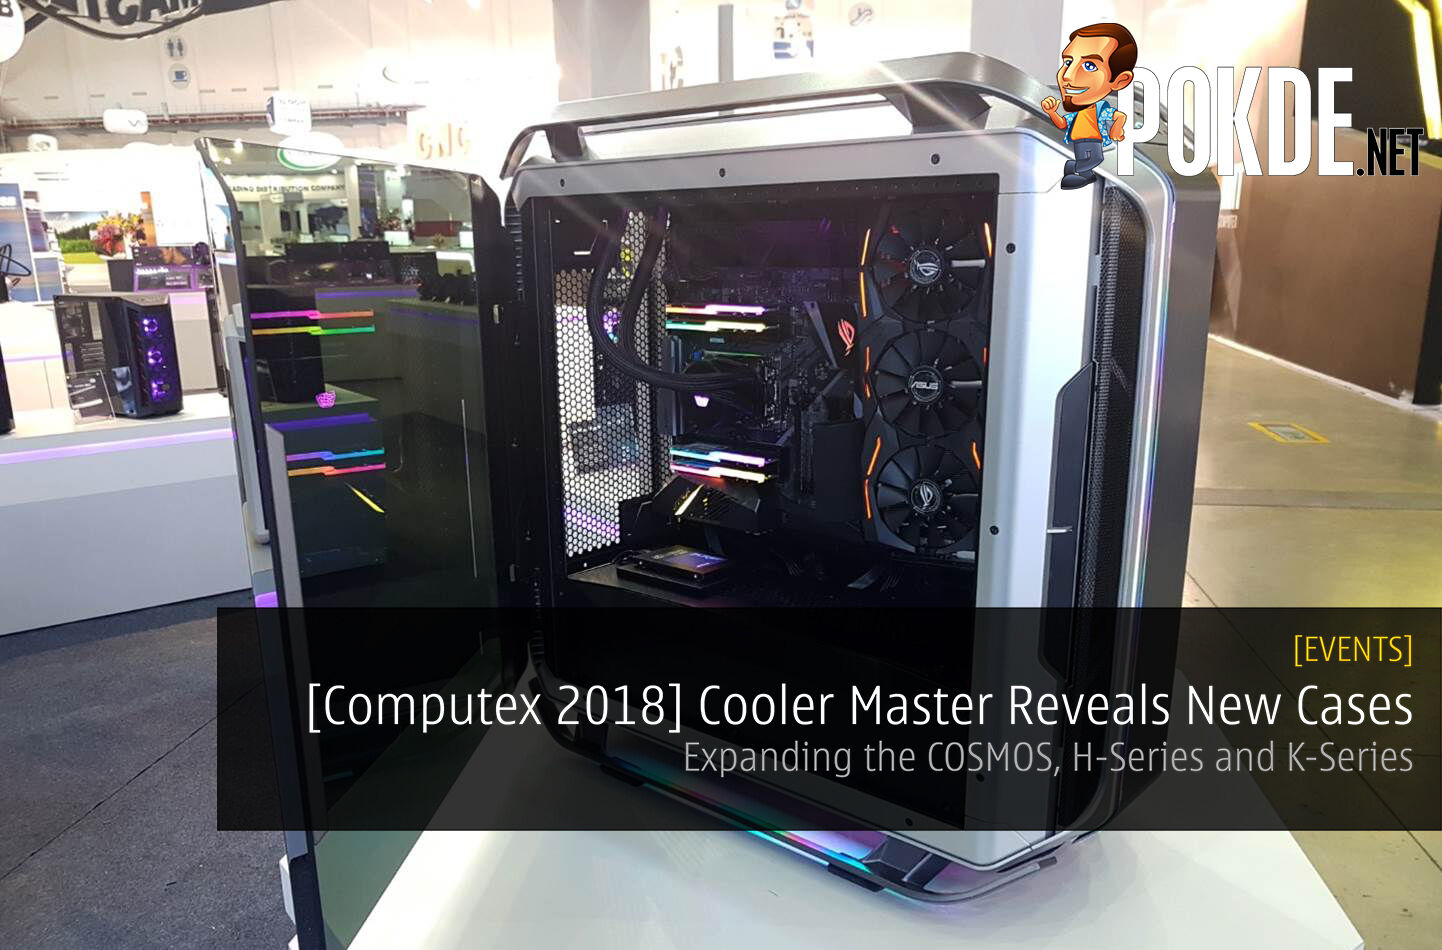 [Computex 2018] Cooler Master Reveals New Case Lineup - Expanding the COSMOS, H-Series and K-Series 26